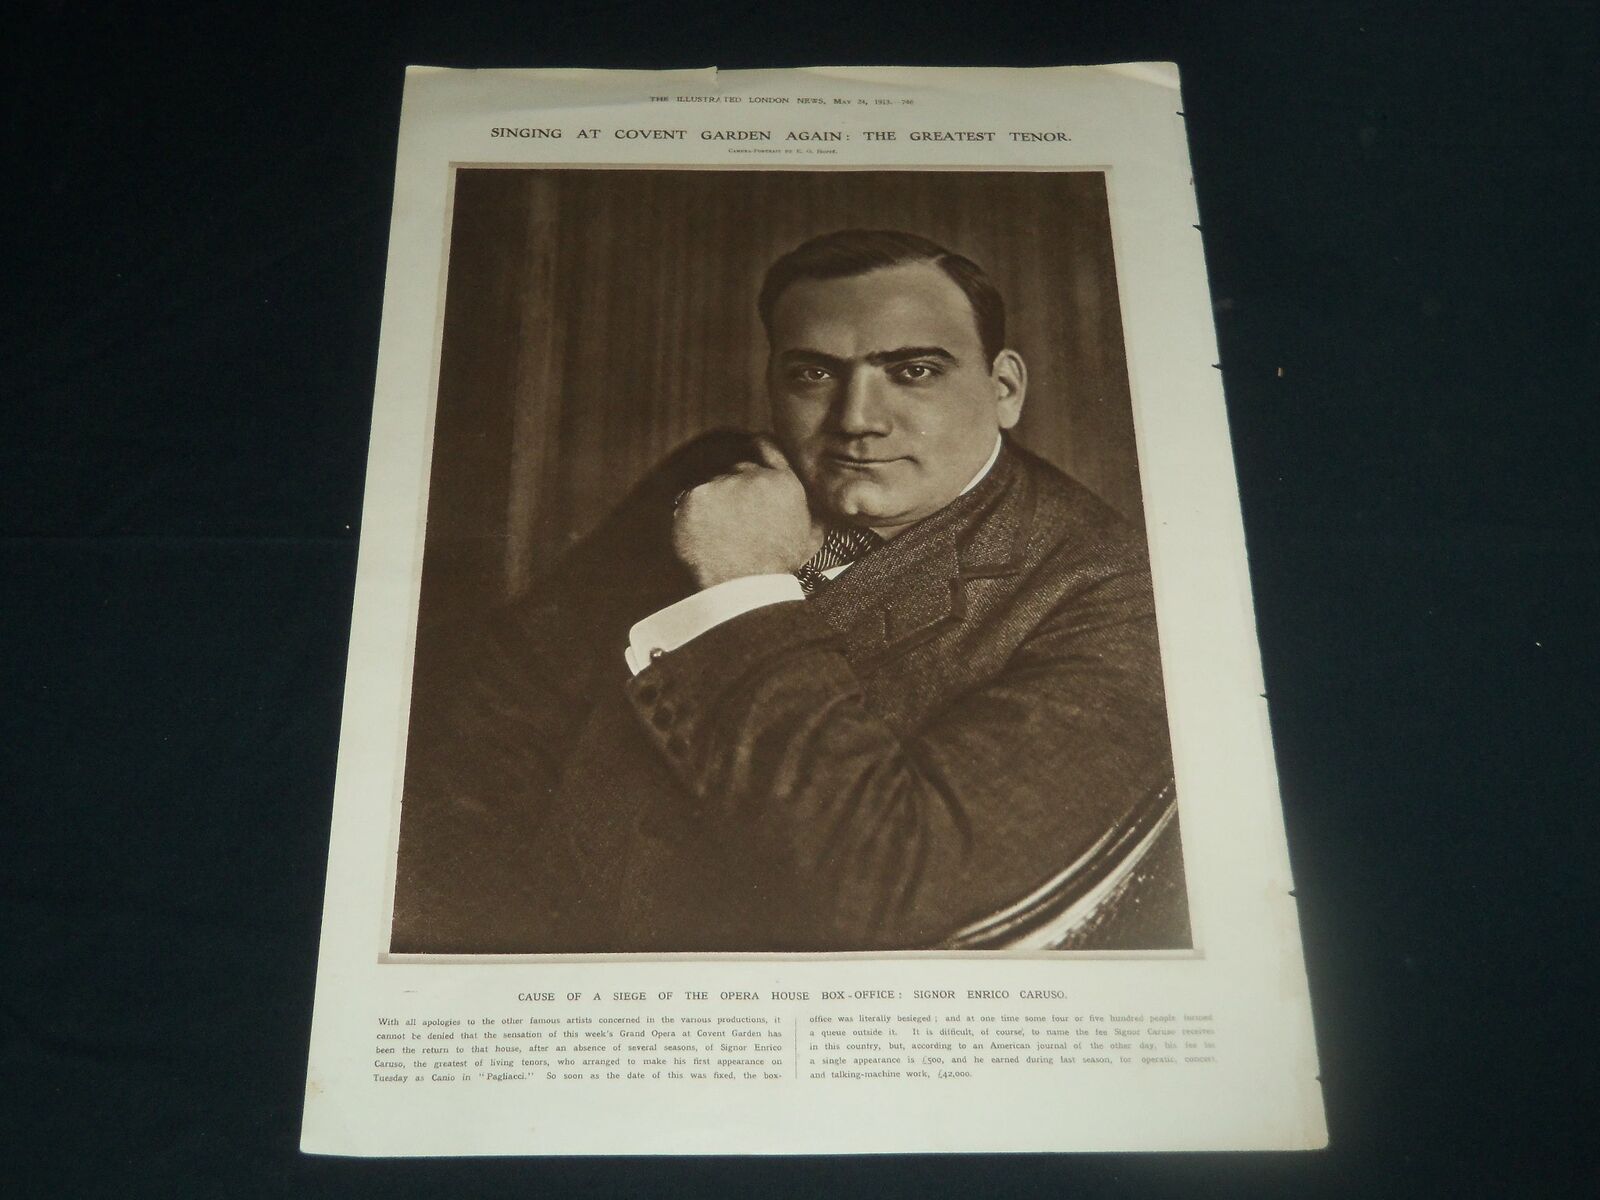 1913 MAY 24 ILLUSTRATED LONDON NEWS PORTRAIT OF ENRICO CARUSO - NP 3850